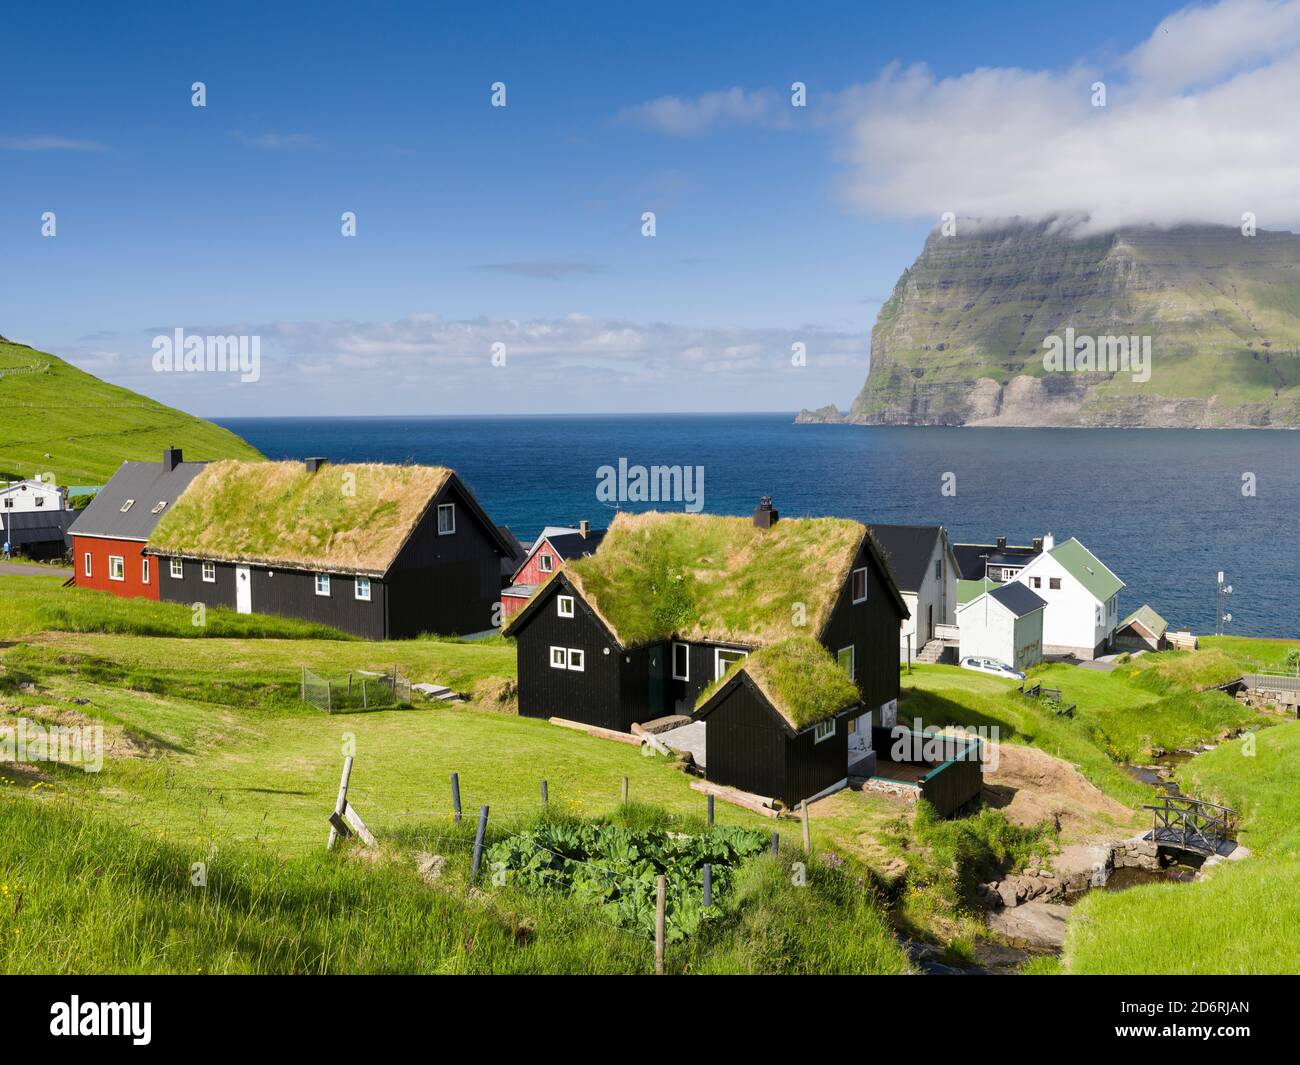 Village Mikladalur, on the Island  Kalsoy, in  background the island Kunoy. Nordoyggjar (Northern Isles) in the Faroe Islands, an archipelago in the n Stock Photo